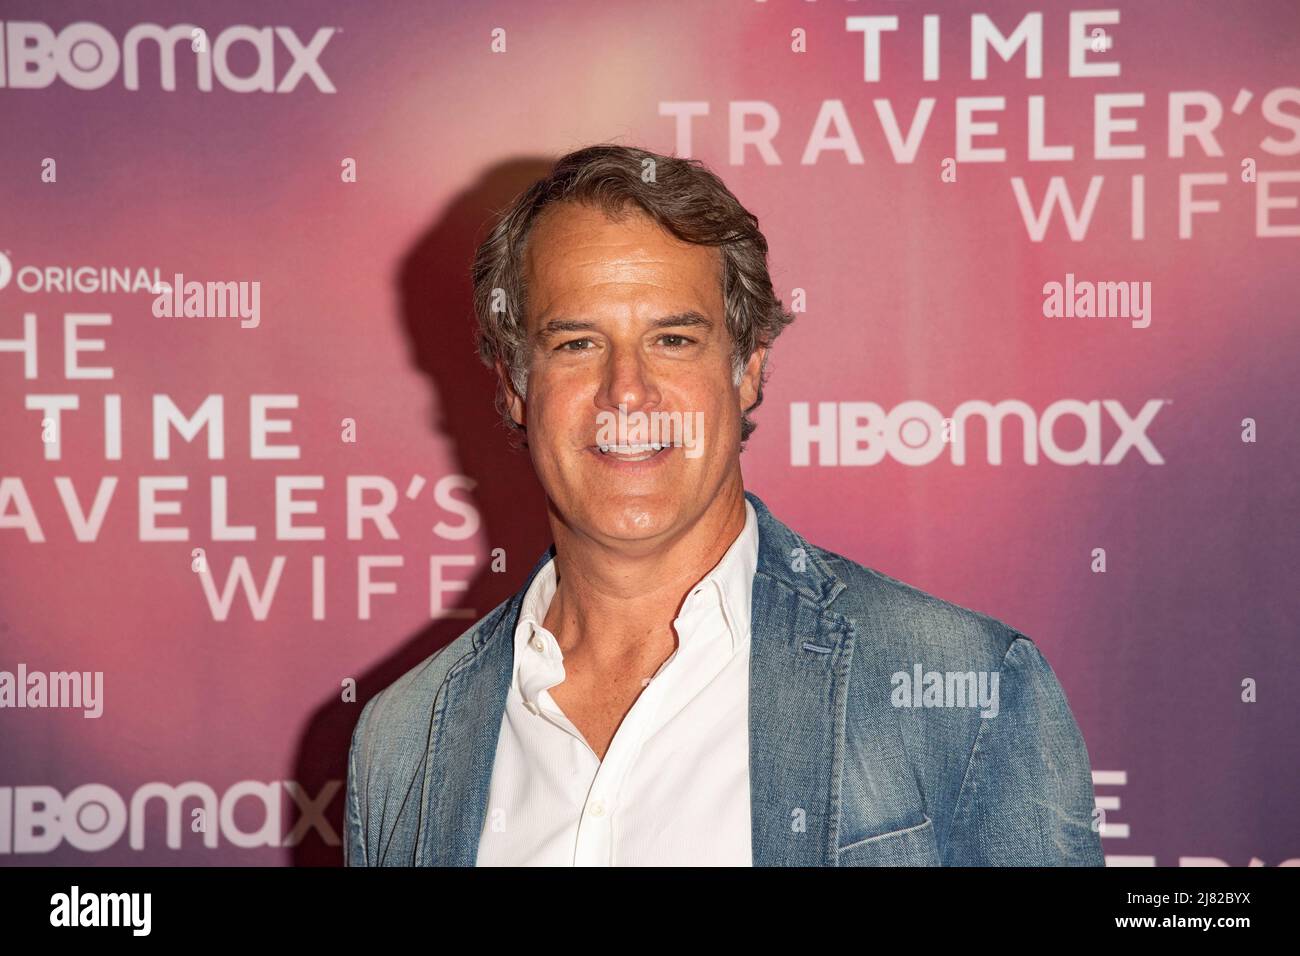 New York, United States. 11th May, 2022. Josh Stamberg attends HBO's "The  Time Traveler's Wife" New York Premiere at The Morgan Library in New York  City on May 11, 2022. (Photo by